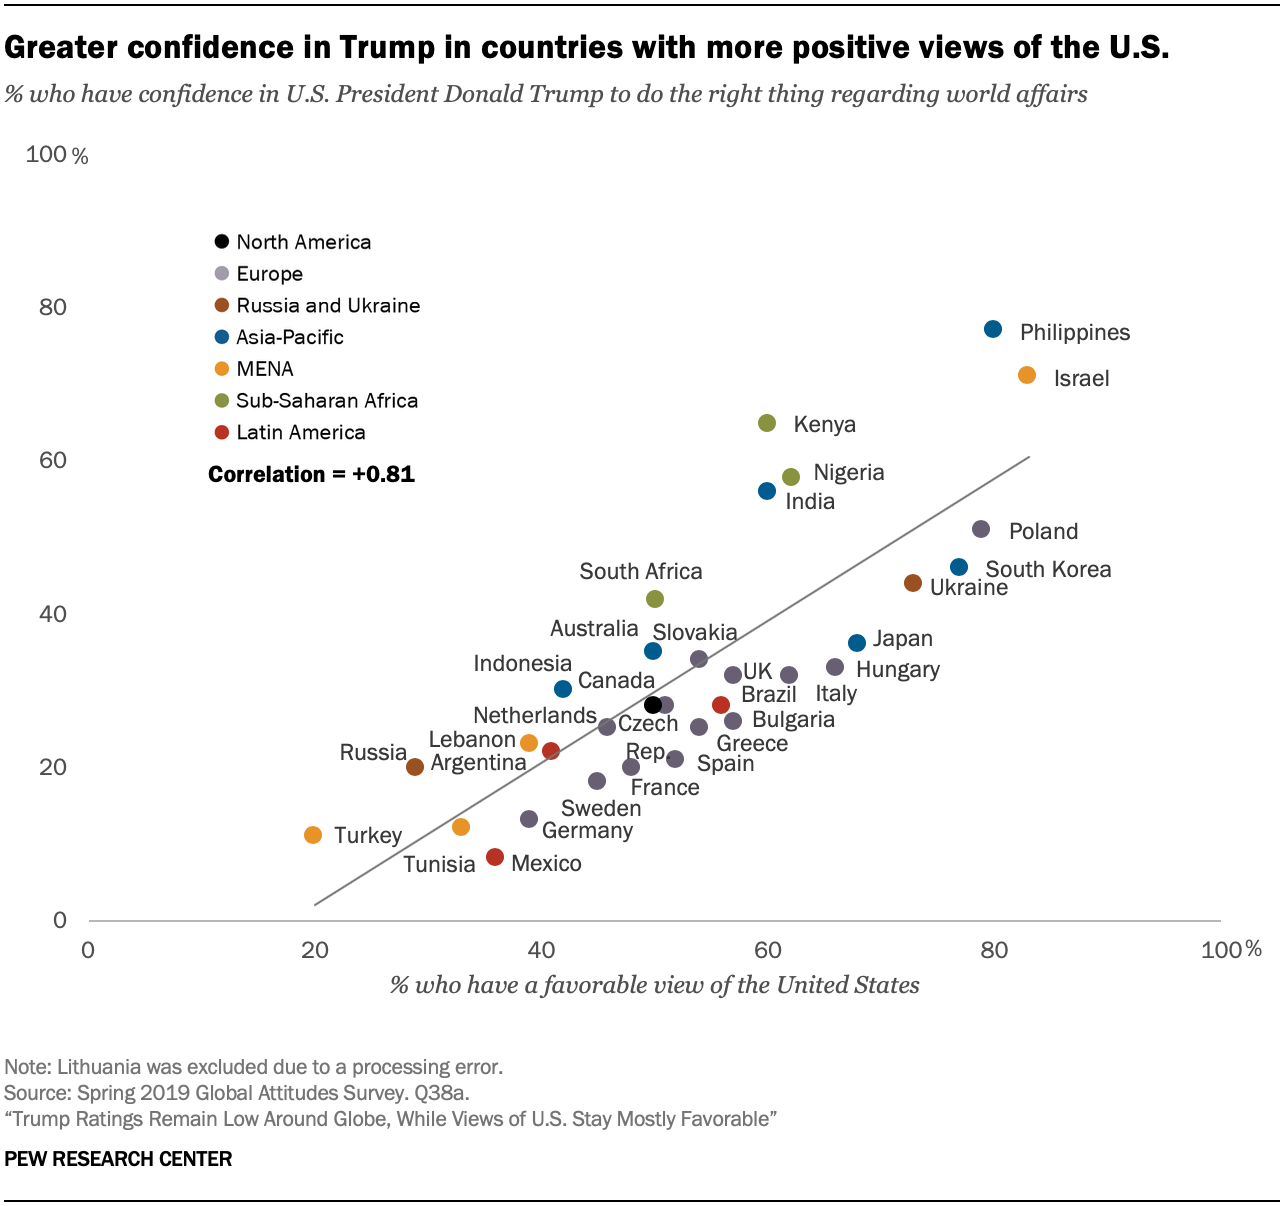 Greater confidence in Trump in countries with more positive views of the U.S.